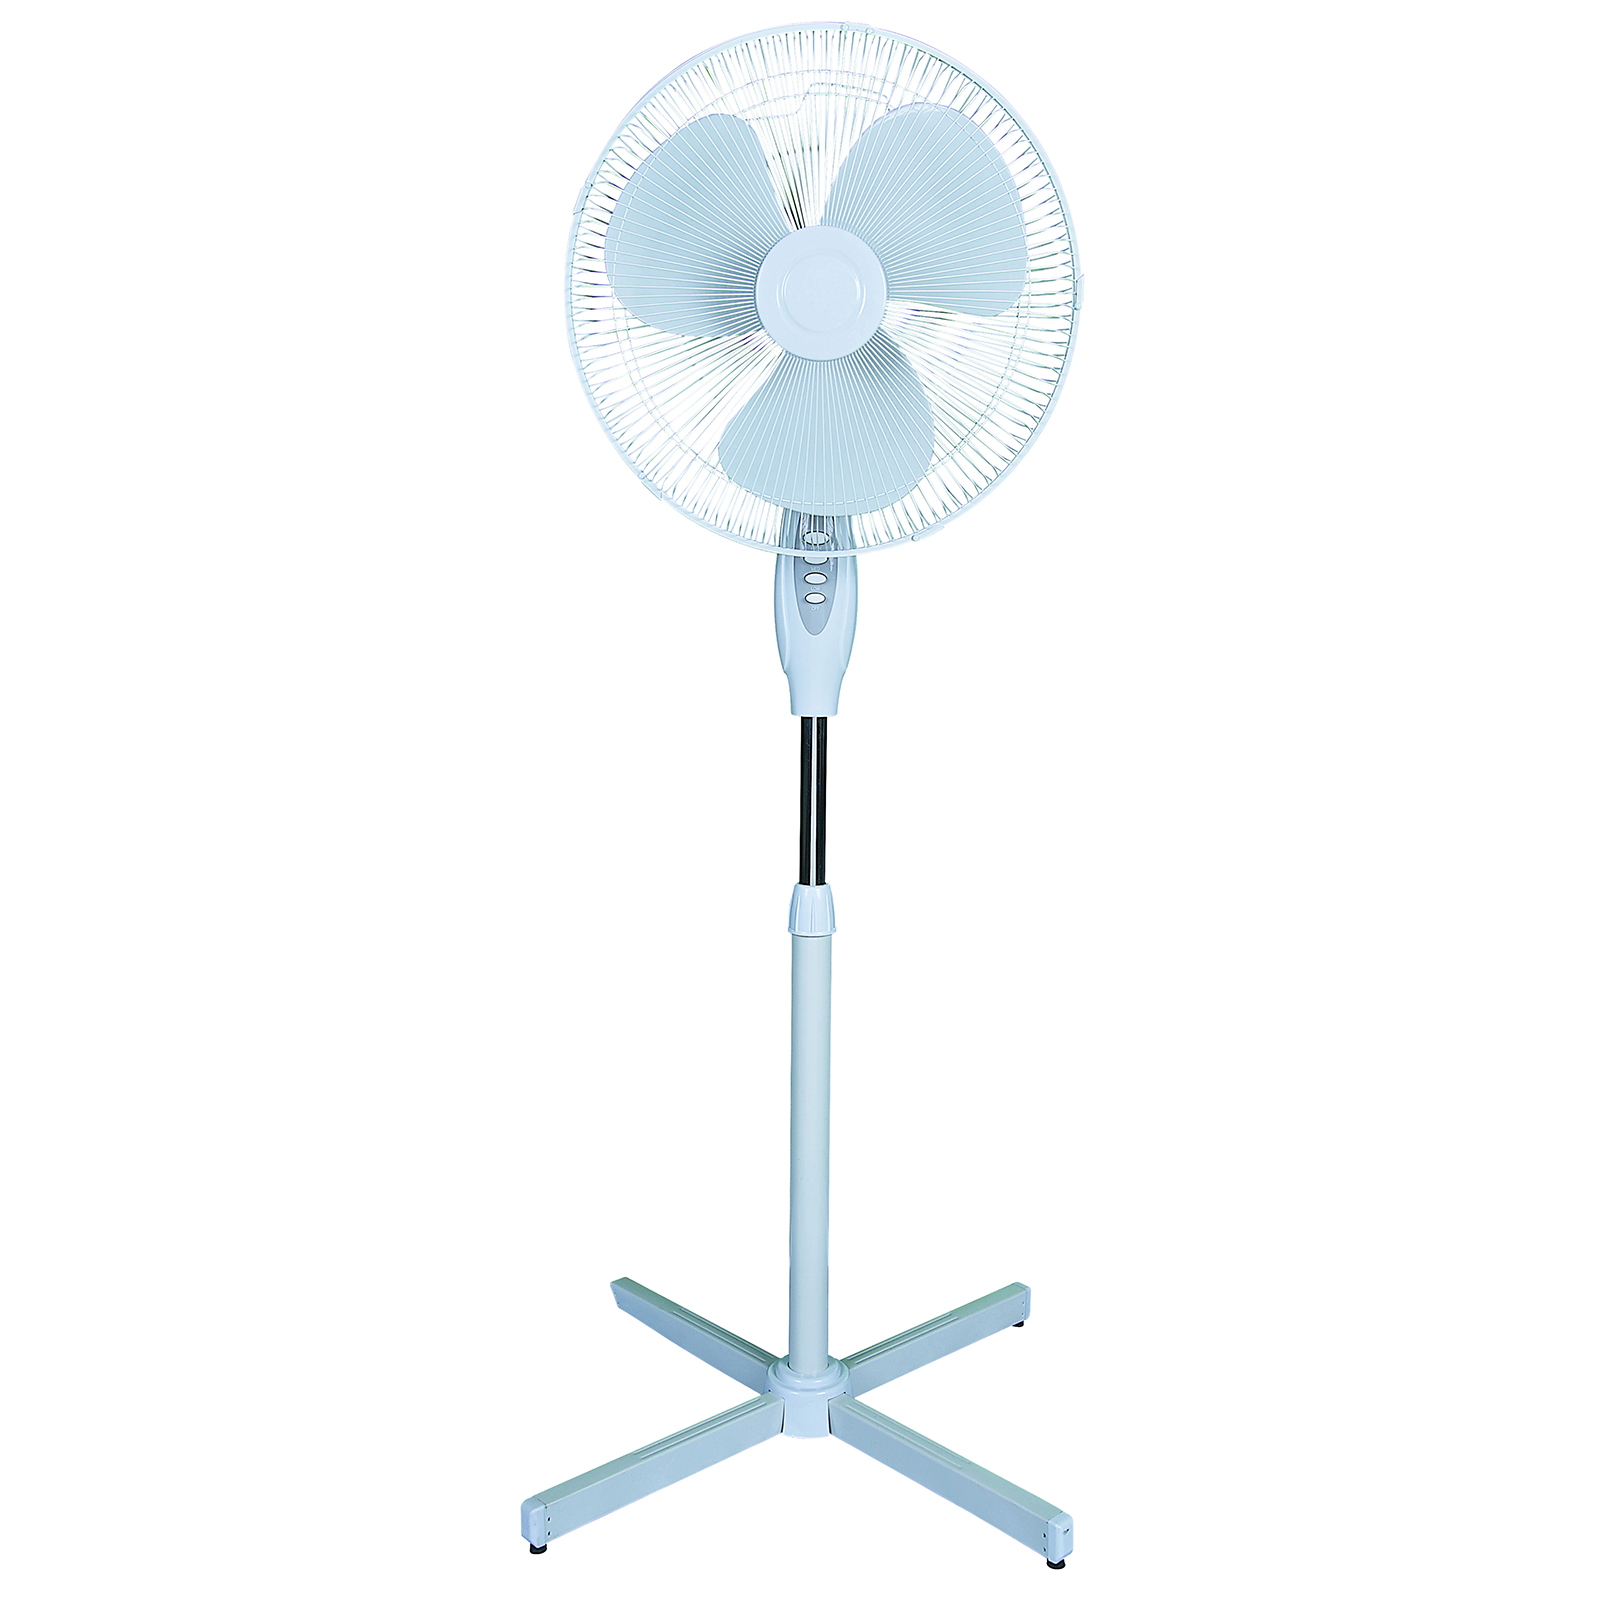 Optimus 16" Oscillating Stand Fan - image 1 of 3